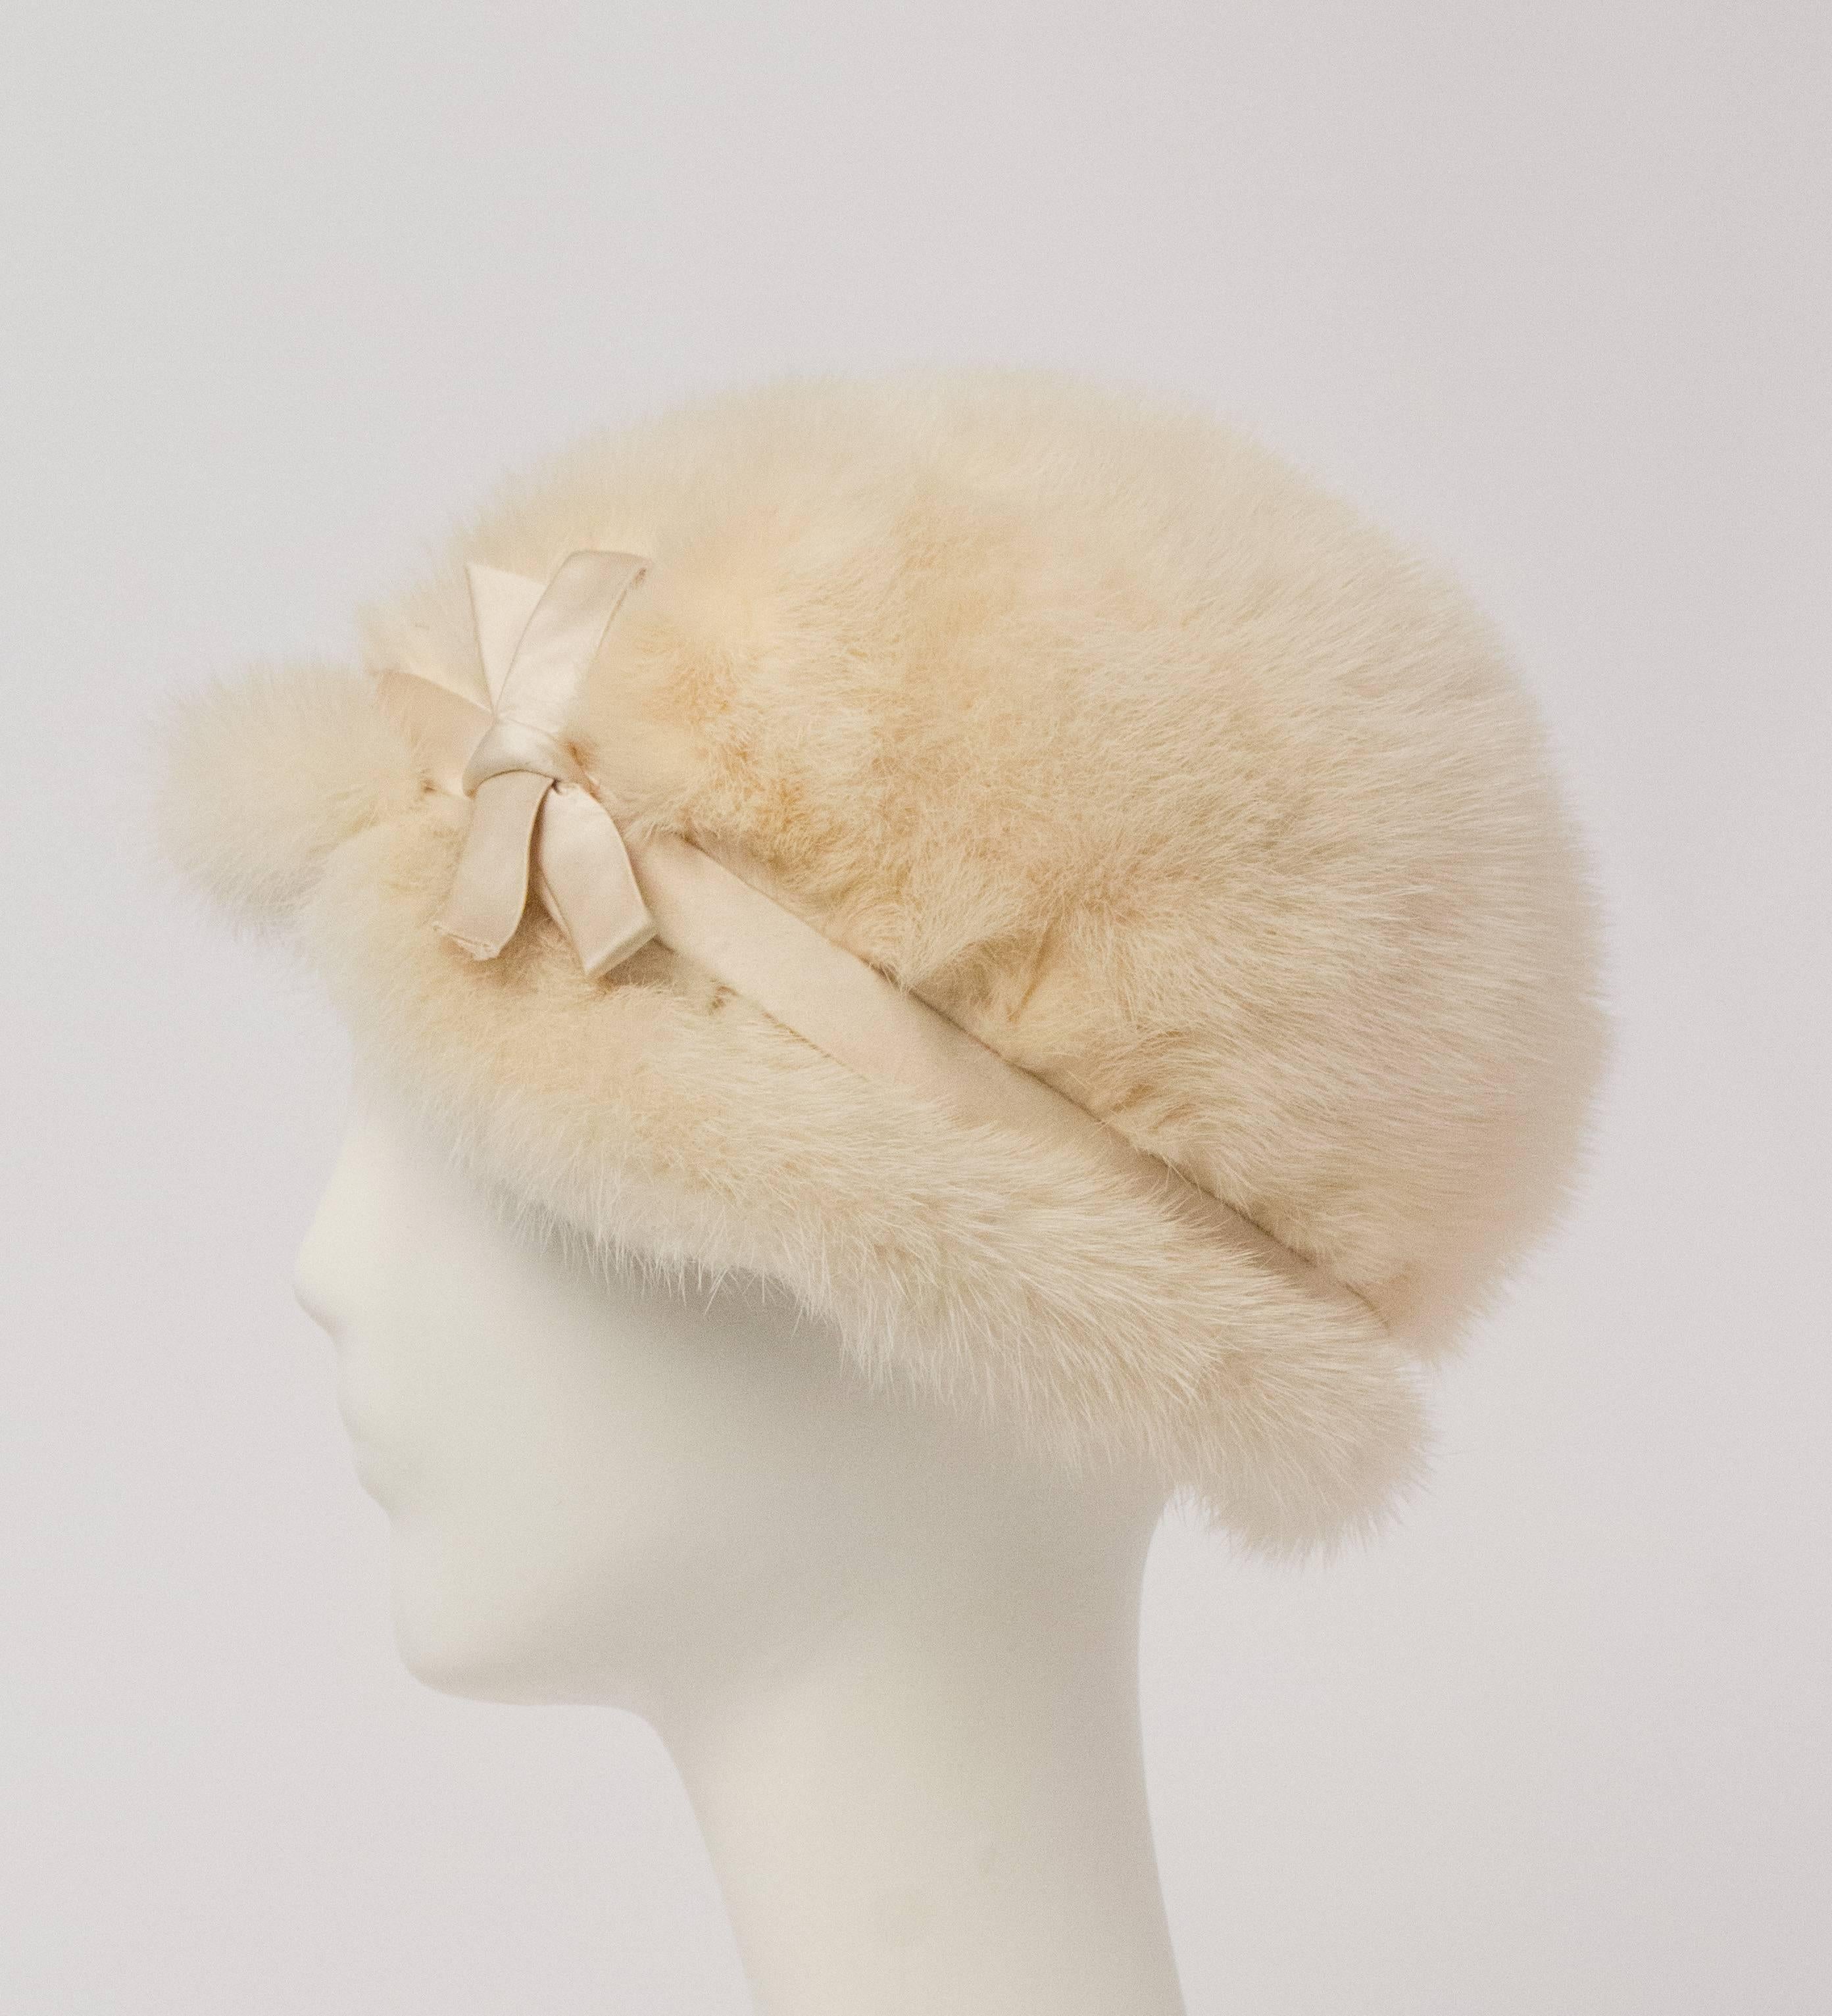 60s cream mink hat with satin band and bow. Wire edged brim for shaping. Grosgrain interior hat band. Lined. 

Measurements 

21 1/2 interior circumference

